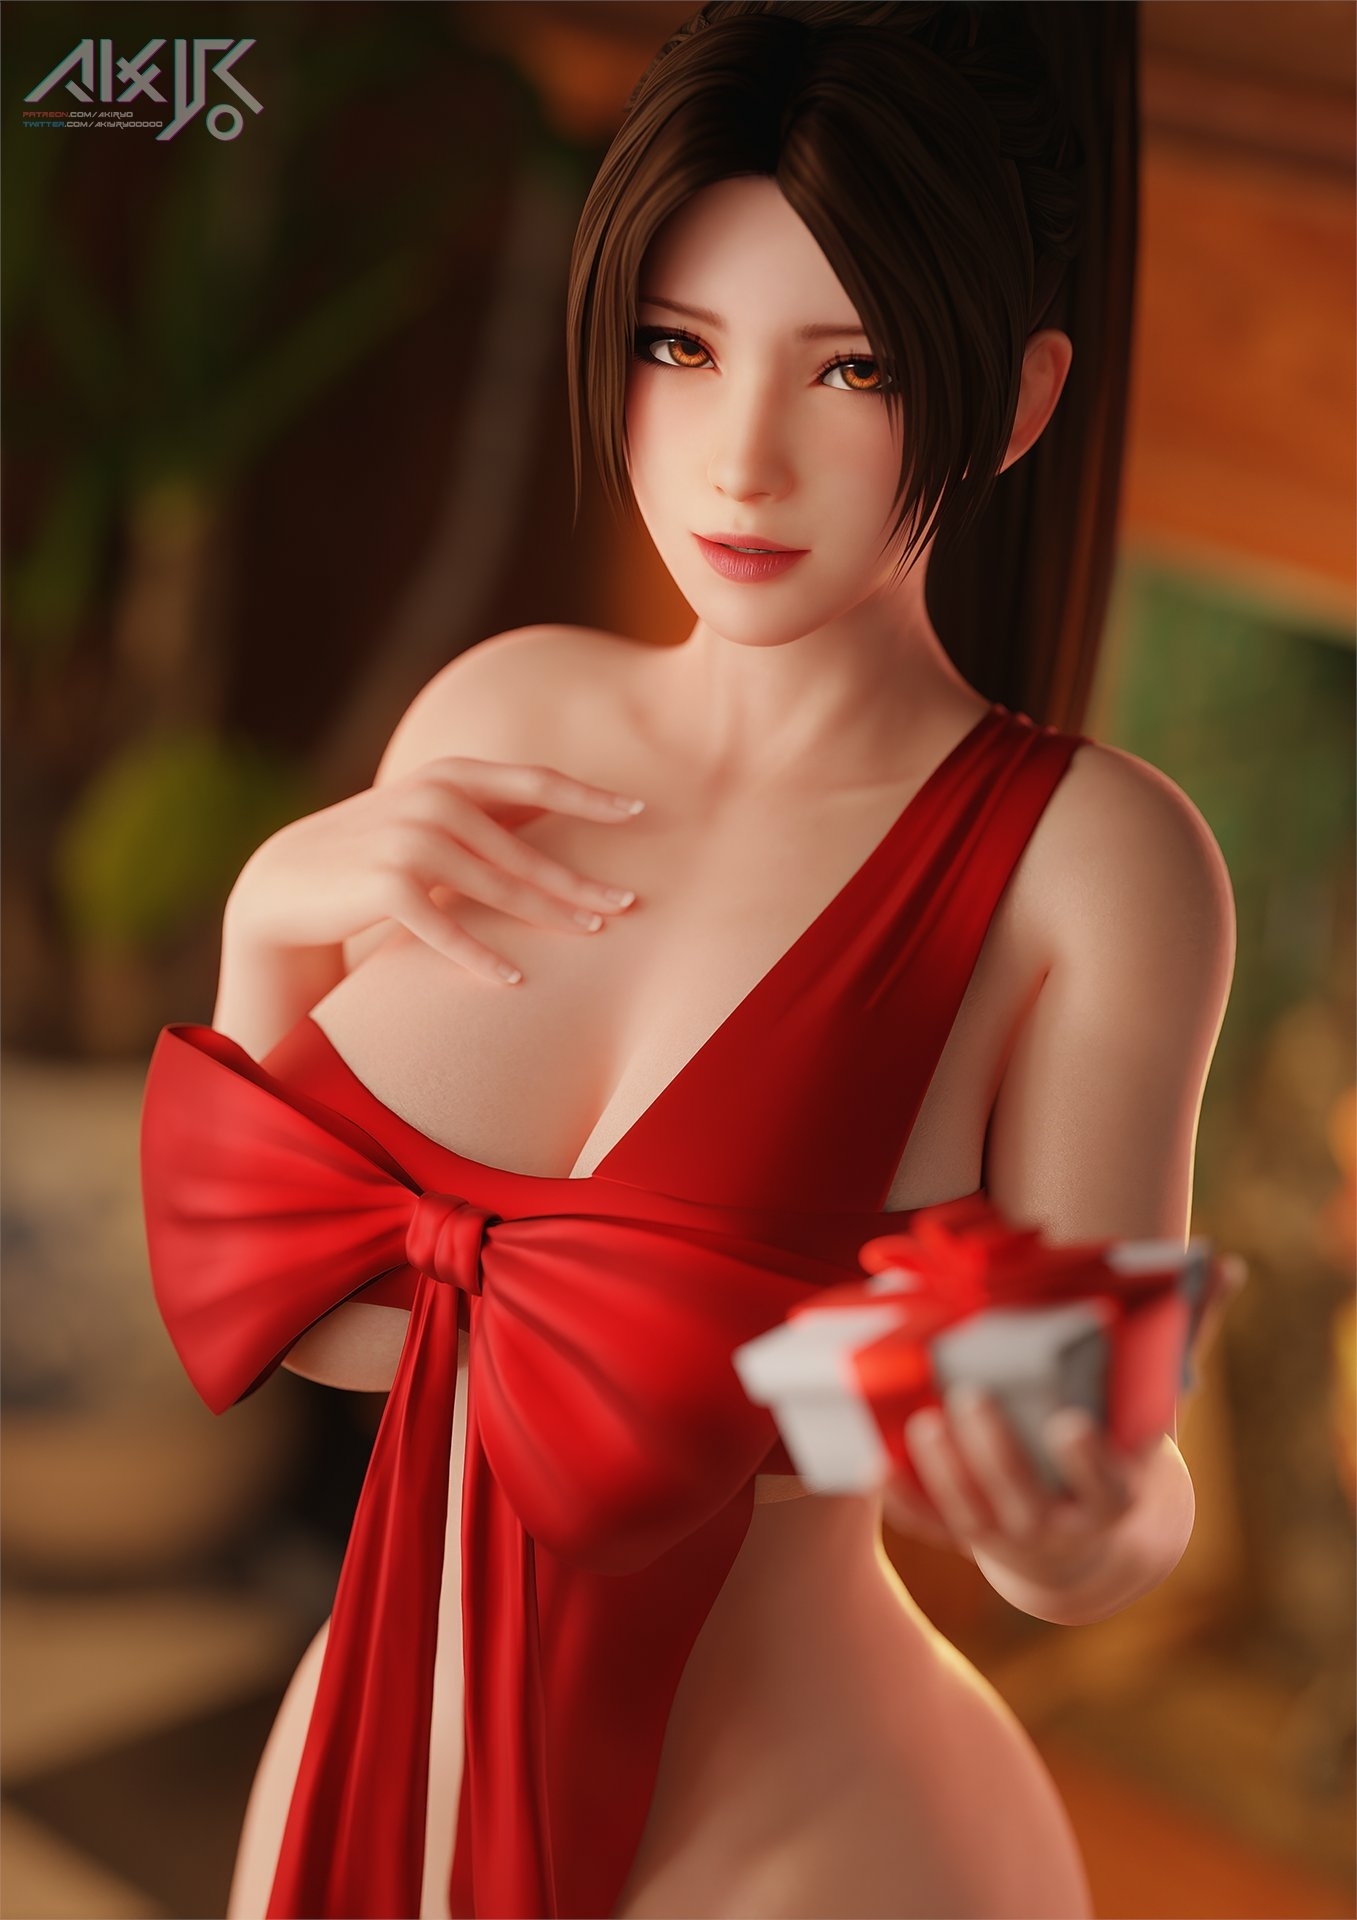 ♥Happy Valentine!!🍫 Mai Shiranui Dead Or Alive 3d Porn 3d Girl Nsfw Sexy Big Tits Big Breasts Outfit Hot Valentine's Day